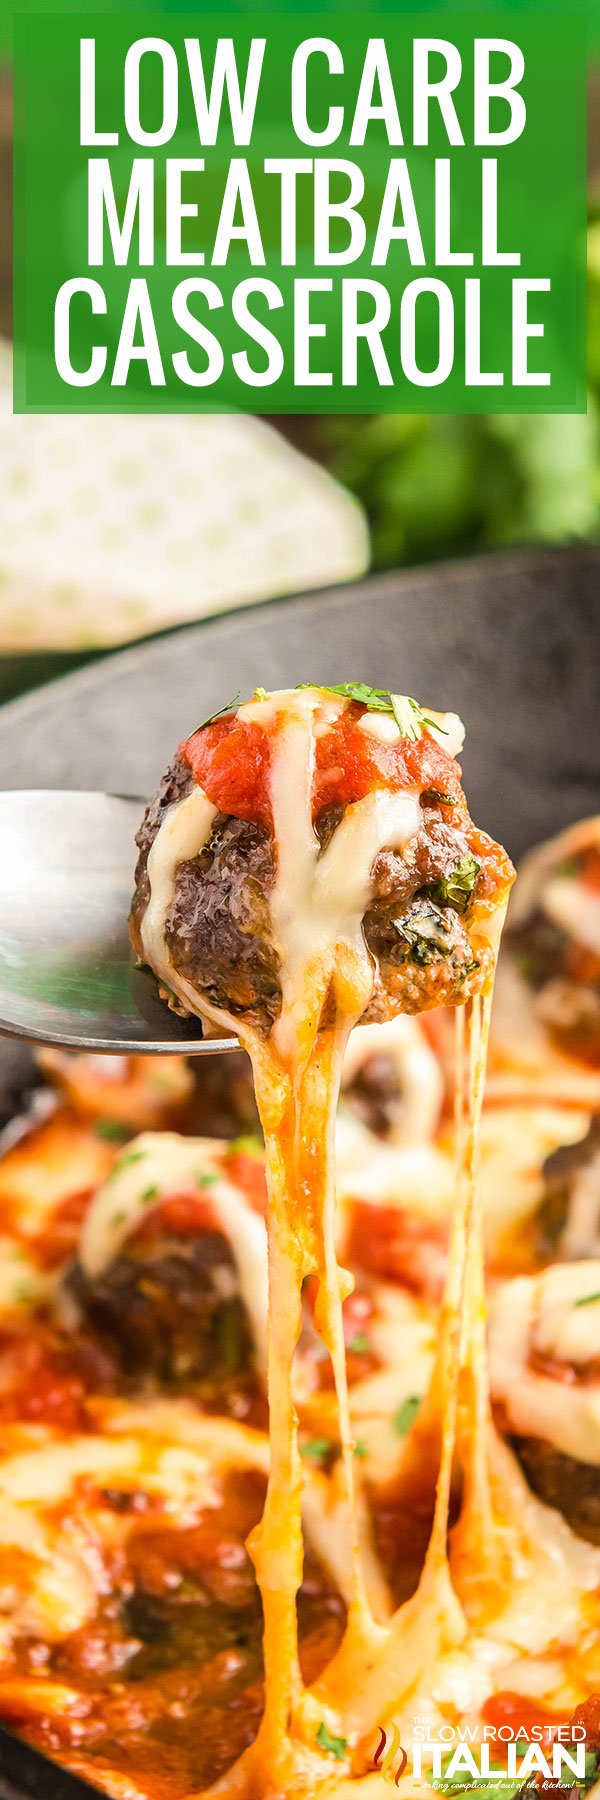 Low Carb Meatball Casserole - PIN